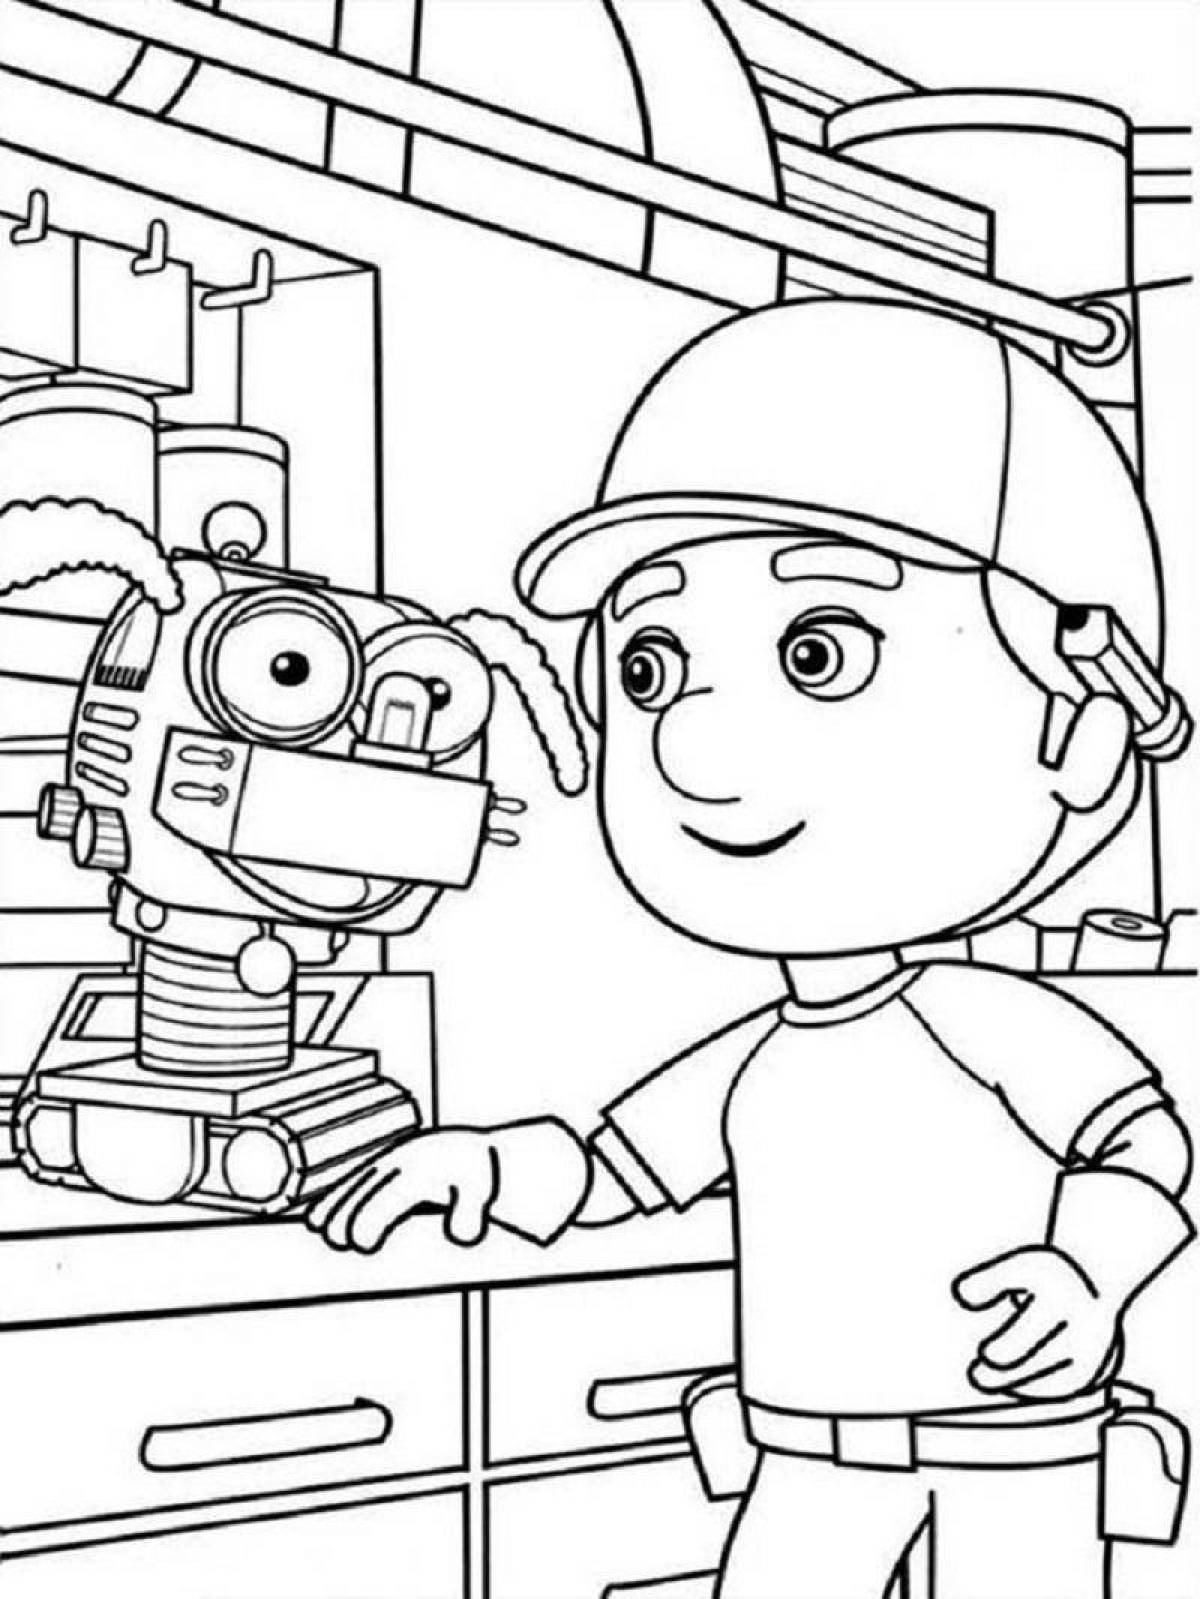 Manny the robot. Умелец Мэнни. Хэнди Мэнни. Умелец Мэнни Handy Manny. Умелец Мэнни, Боб-Строитель.